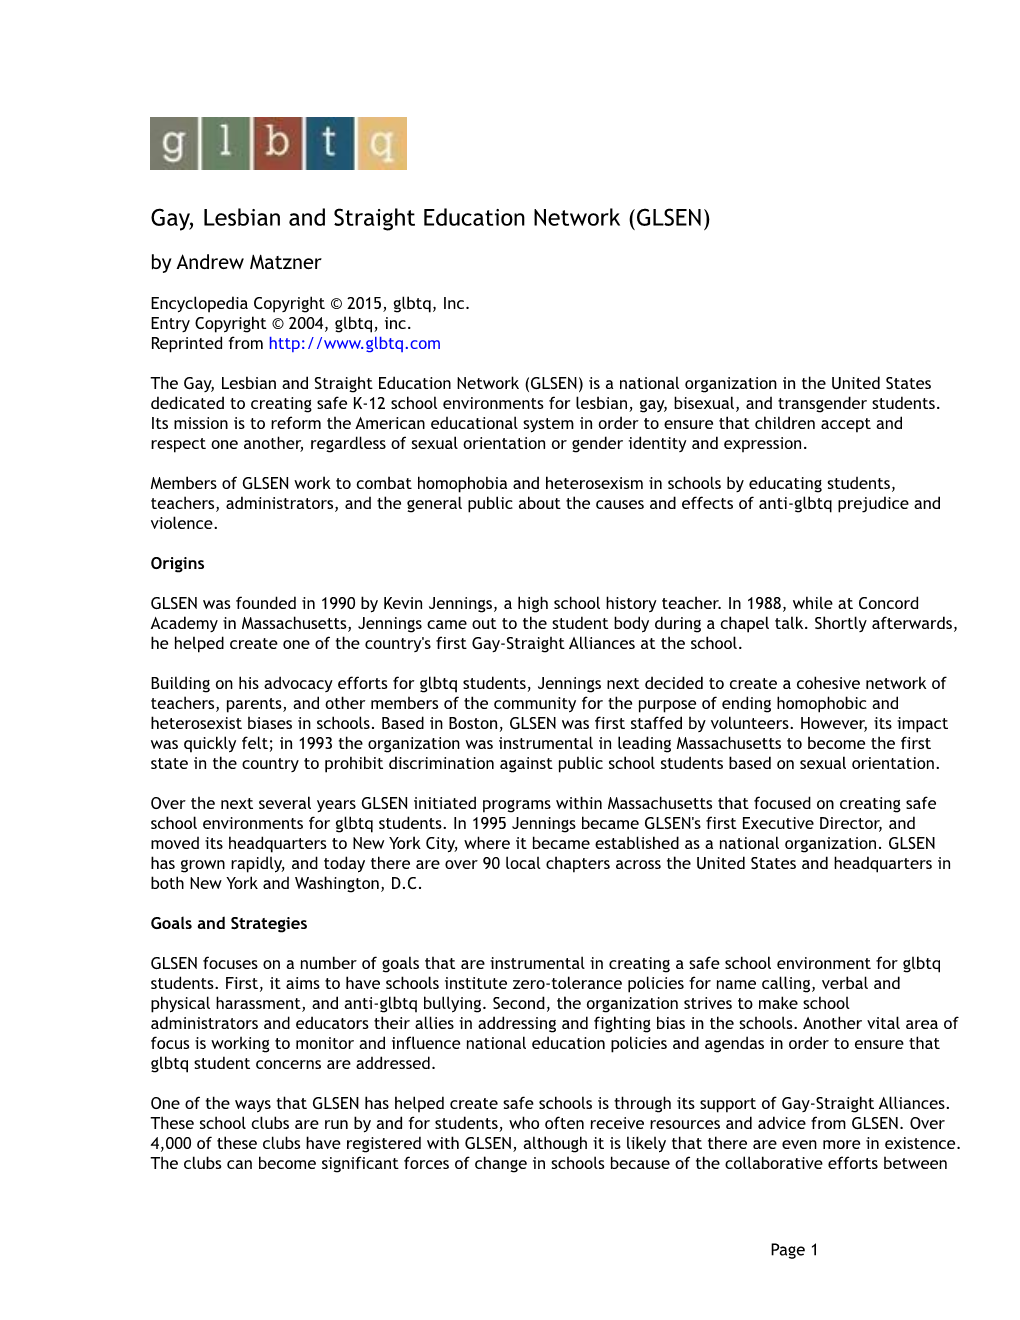 Gay, Lesbian and Straight Education Network (GLSEN) by Andrew Matzner